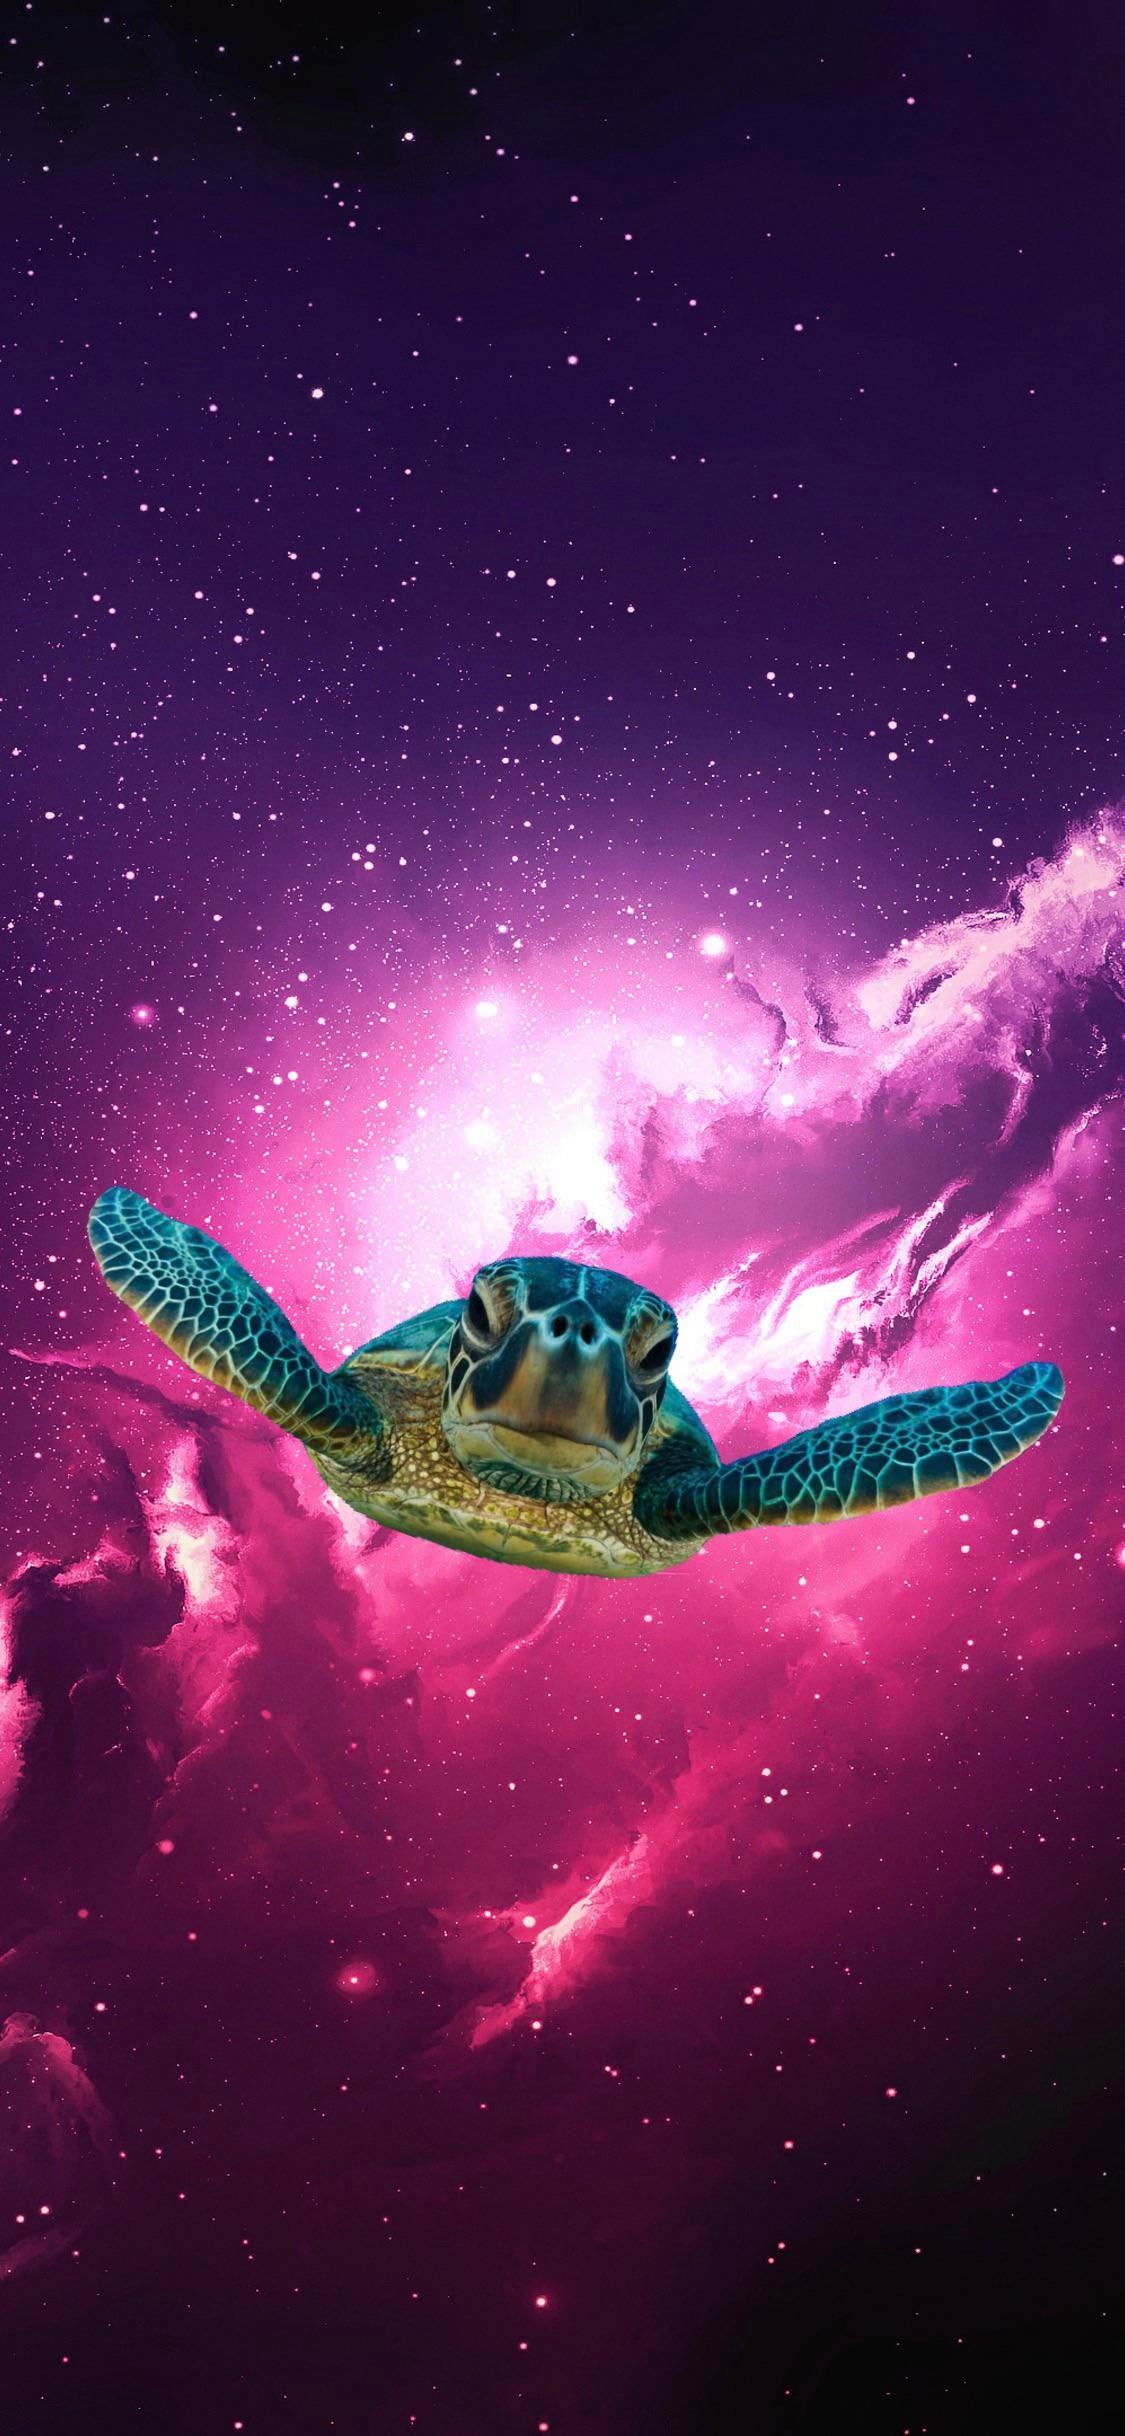 I Ve Been Using An Old Version Of The Space Turtle As My Wallpaper